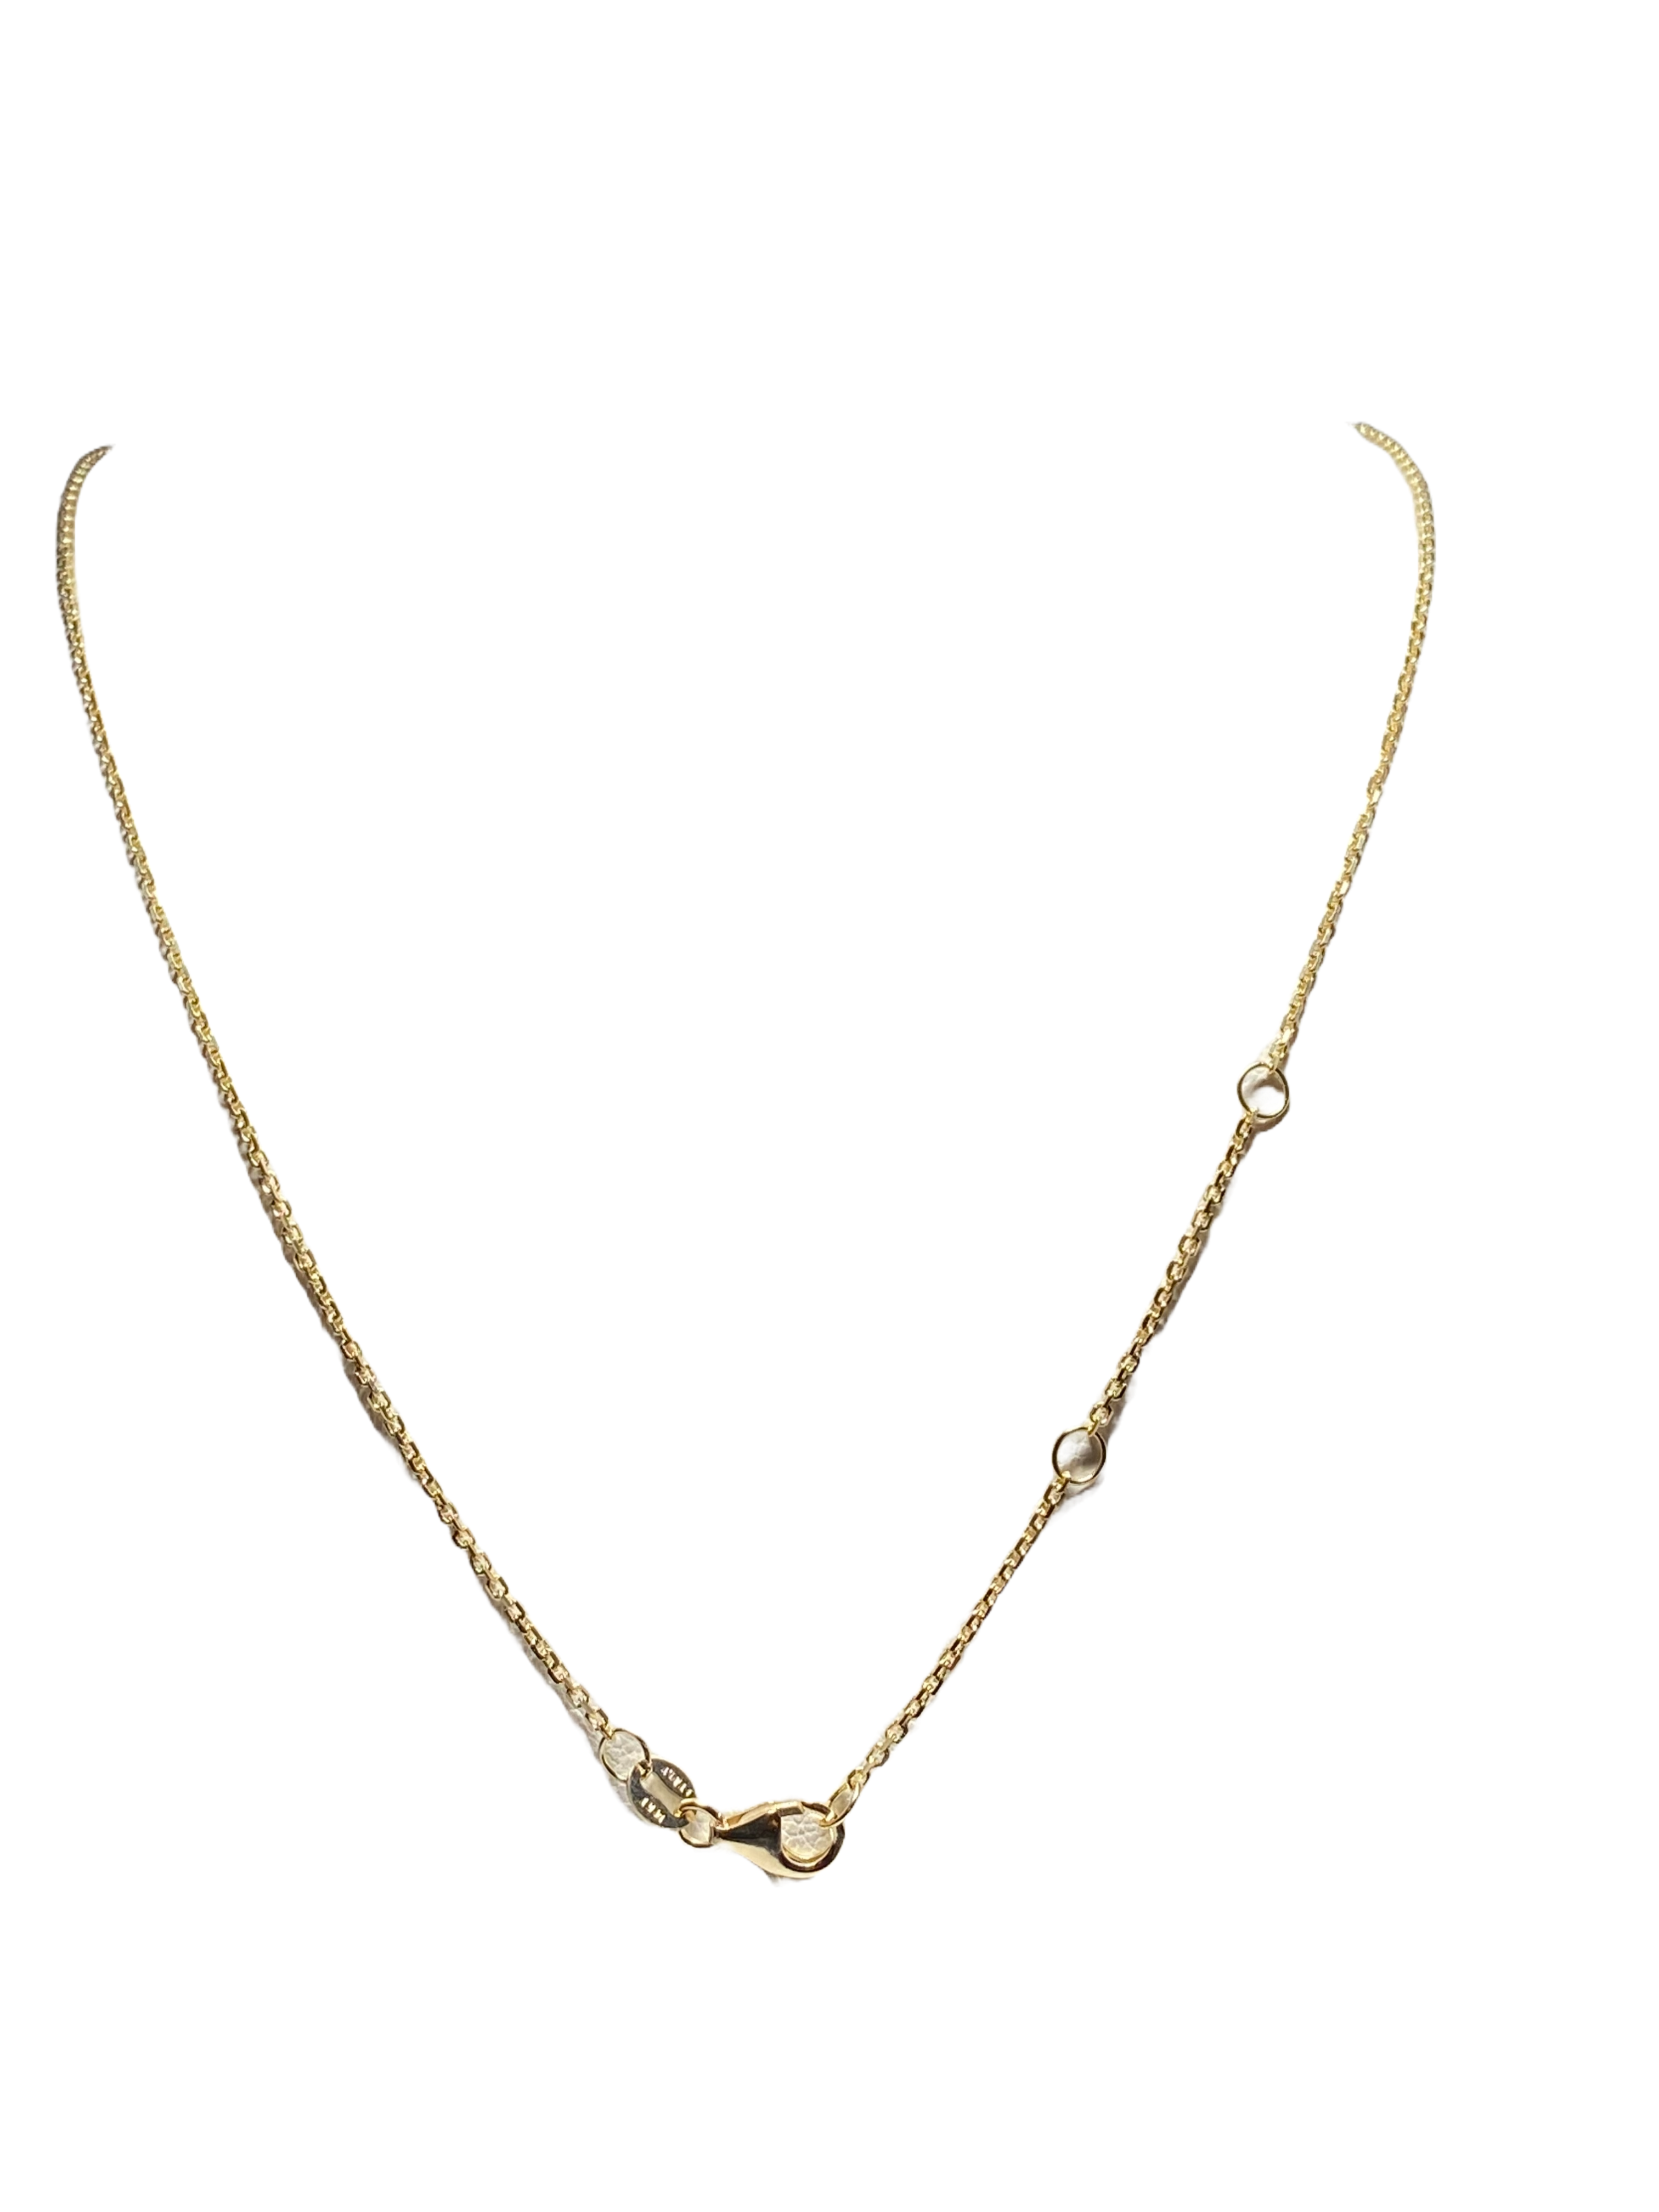 14k Yellow Gold Diamond Cut Cable Adjustable 1.3mm Chain 18″